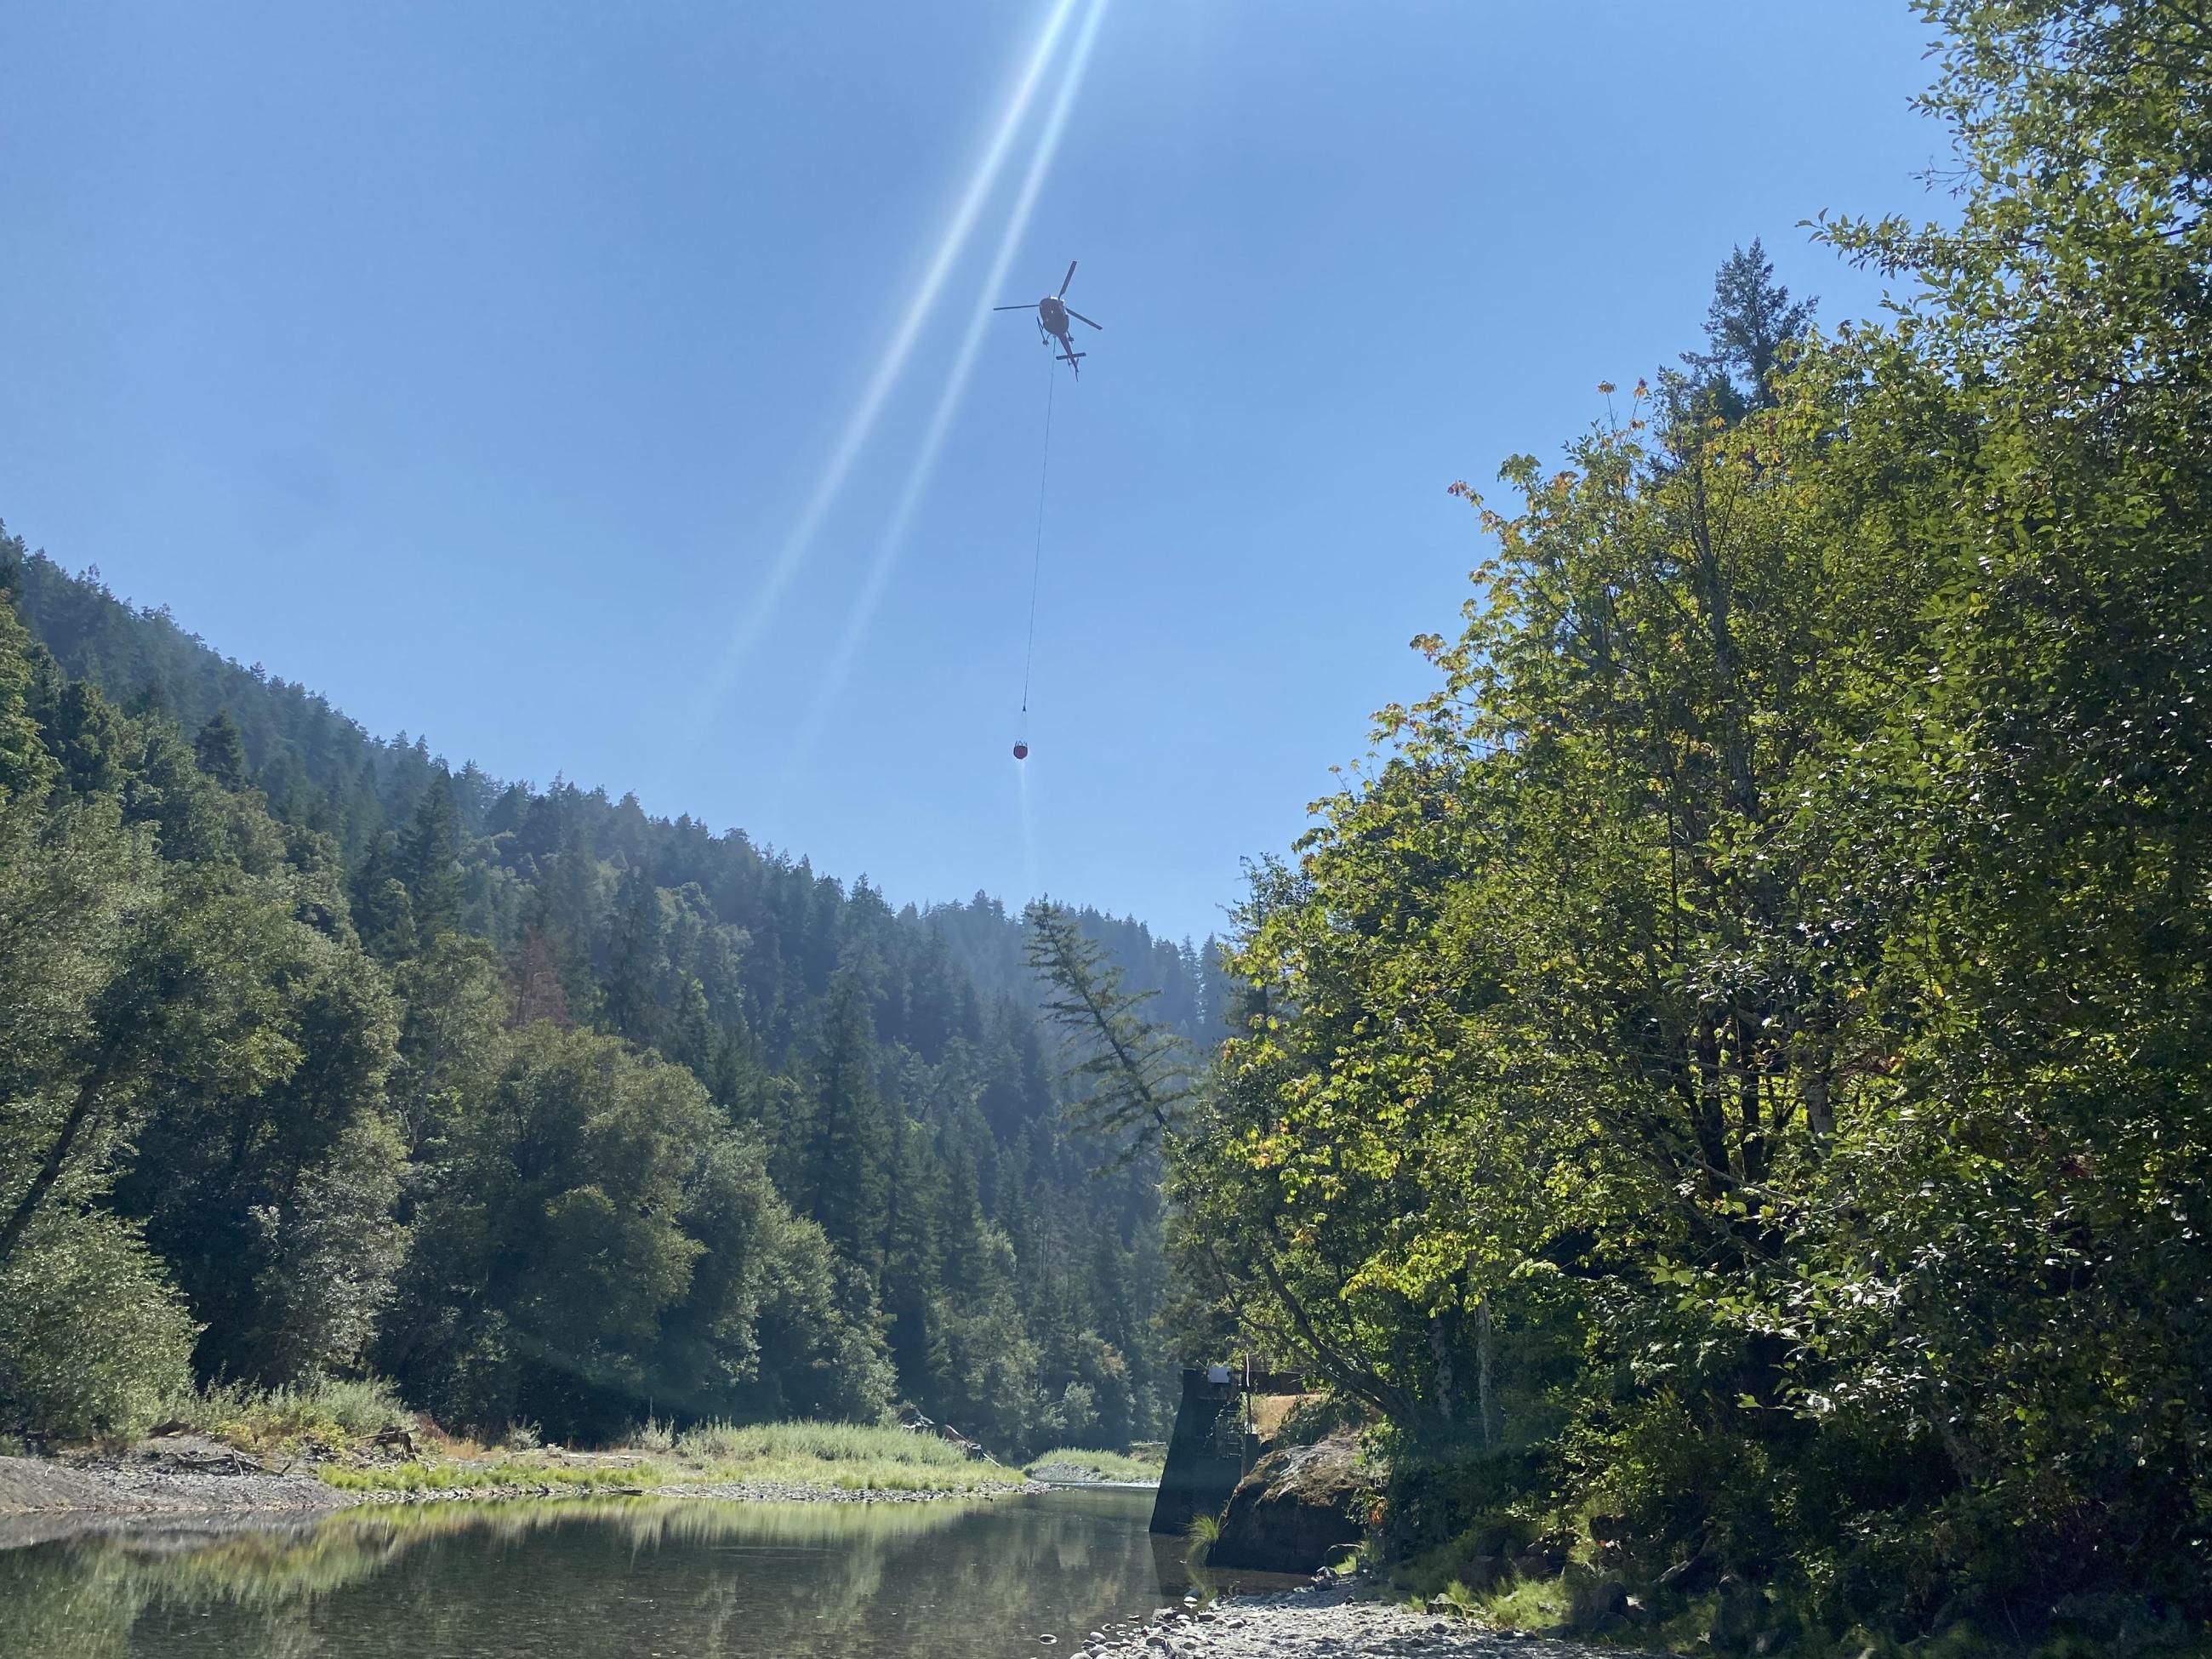 A helicopter soars through the sky with a bucket attached by a long a cable over the Elk River.